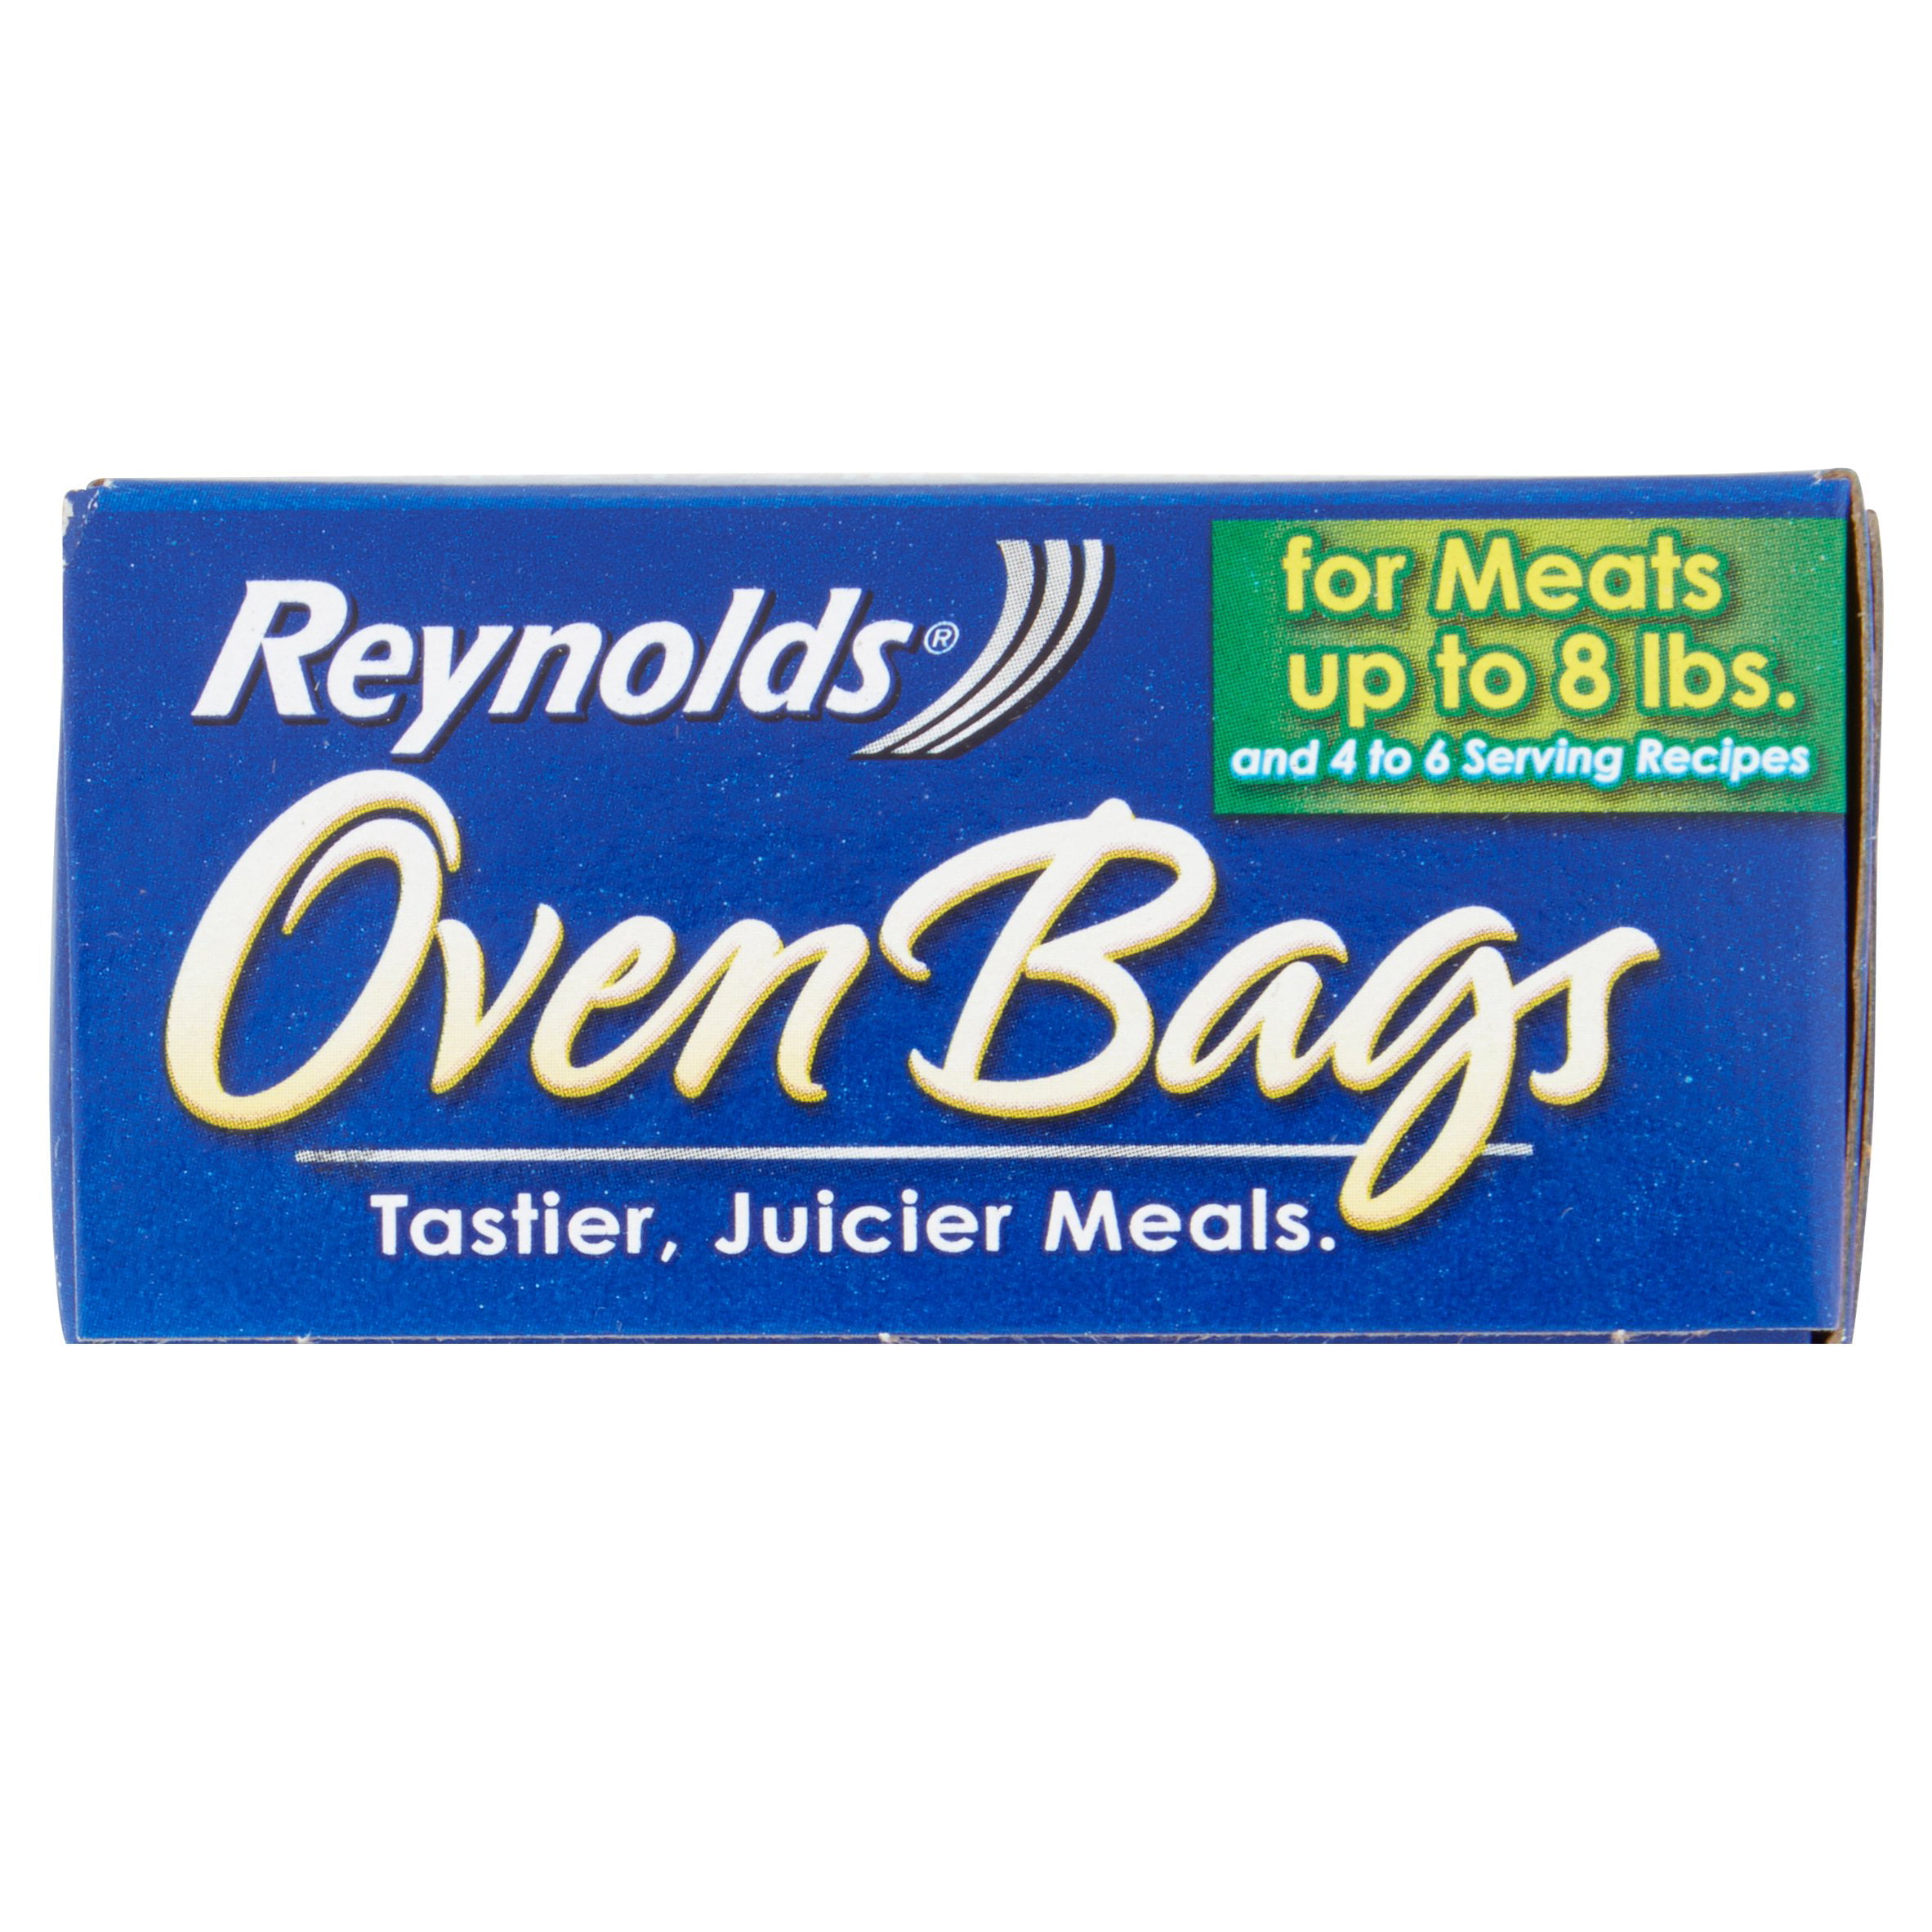 Reynolds Kitchens Large Oven Bags, 5 Count